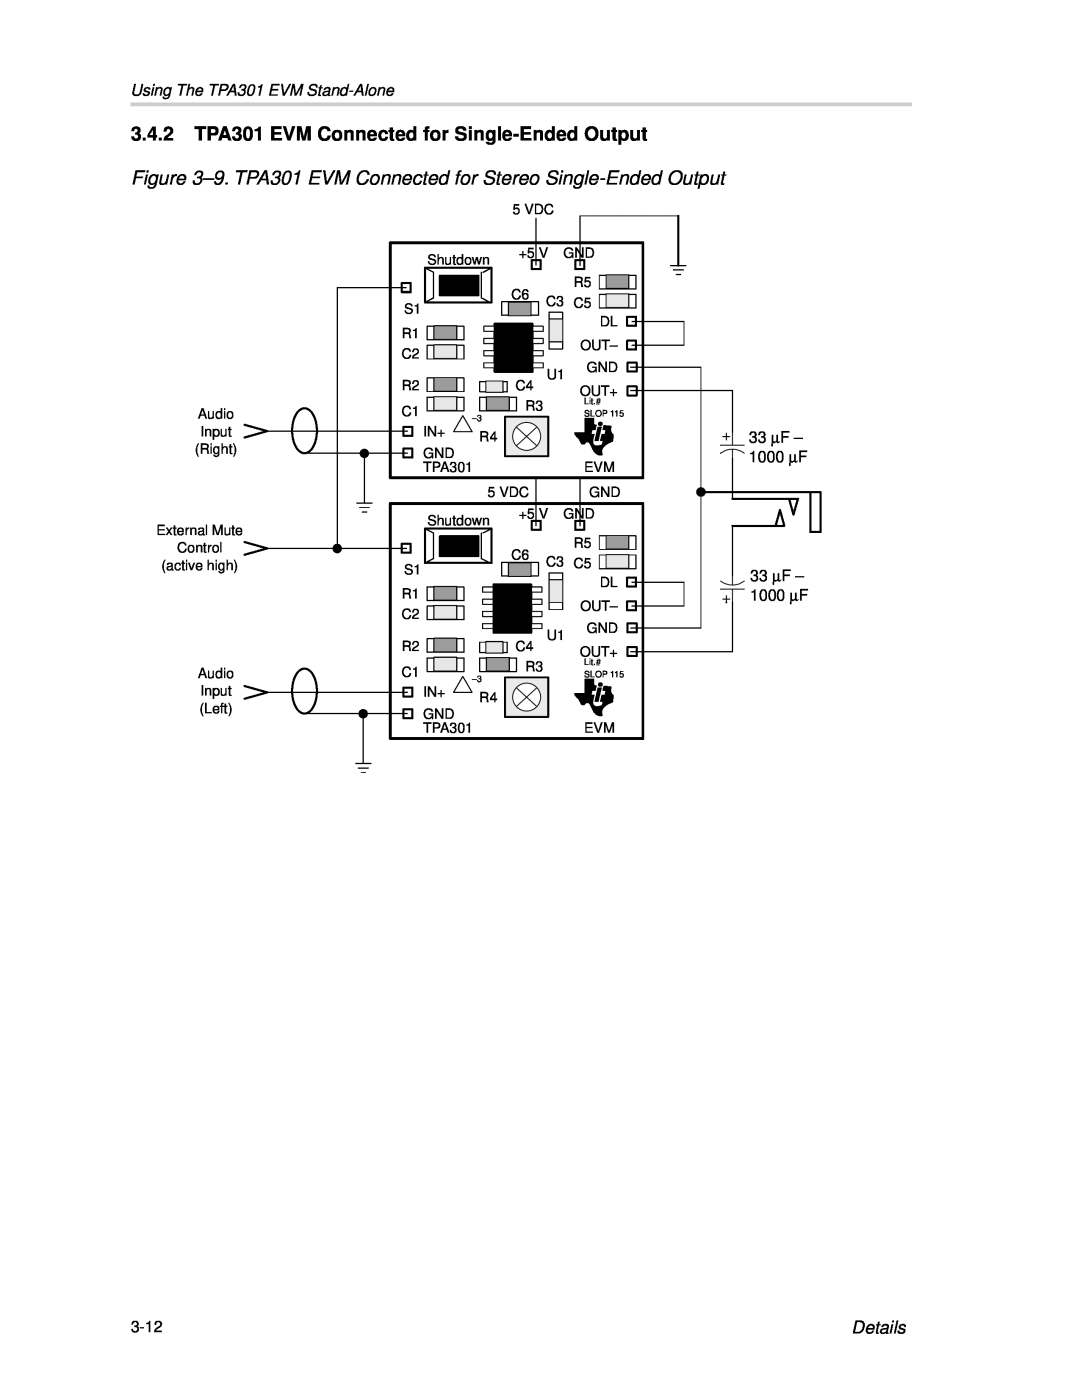 Texas Instruments manual 3.4.2TPA301 EVM Connected for Single-EndedOutput, Details, Using The TPA301 EVM Stand-Alone 